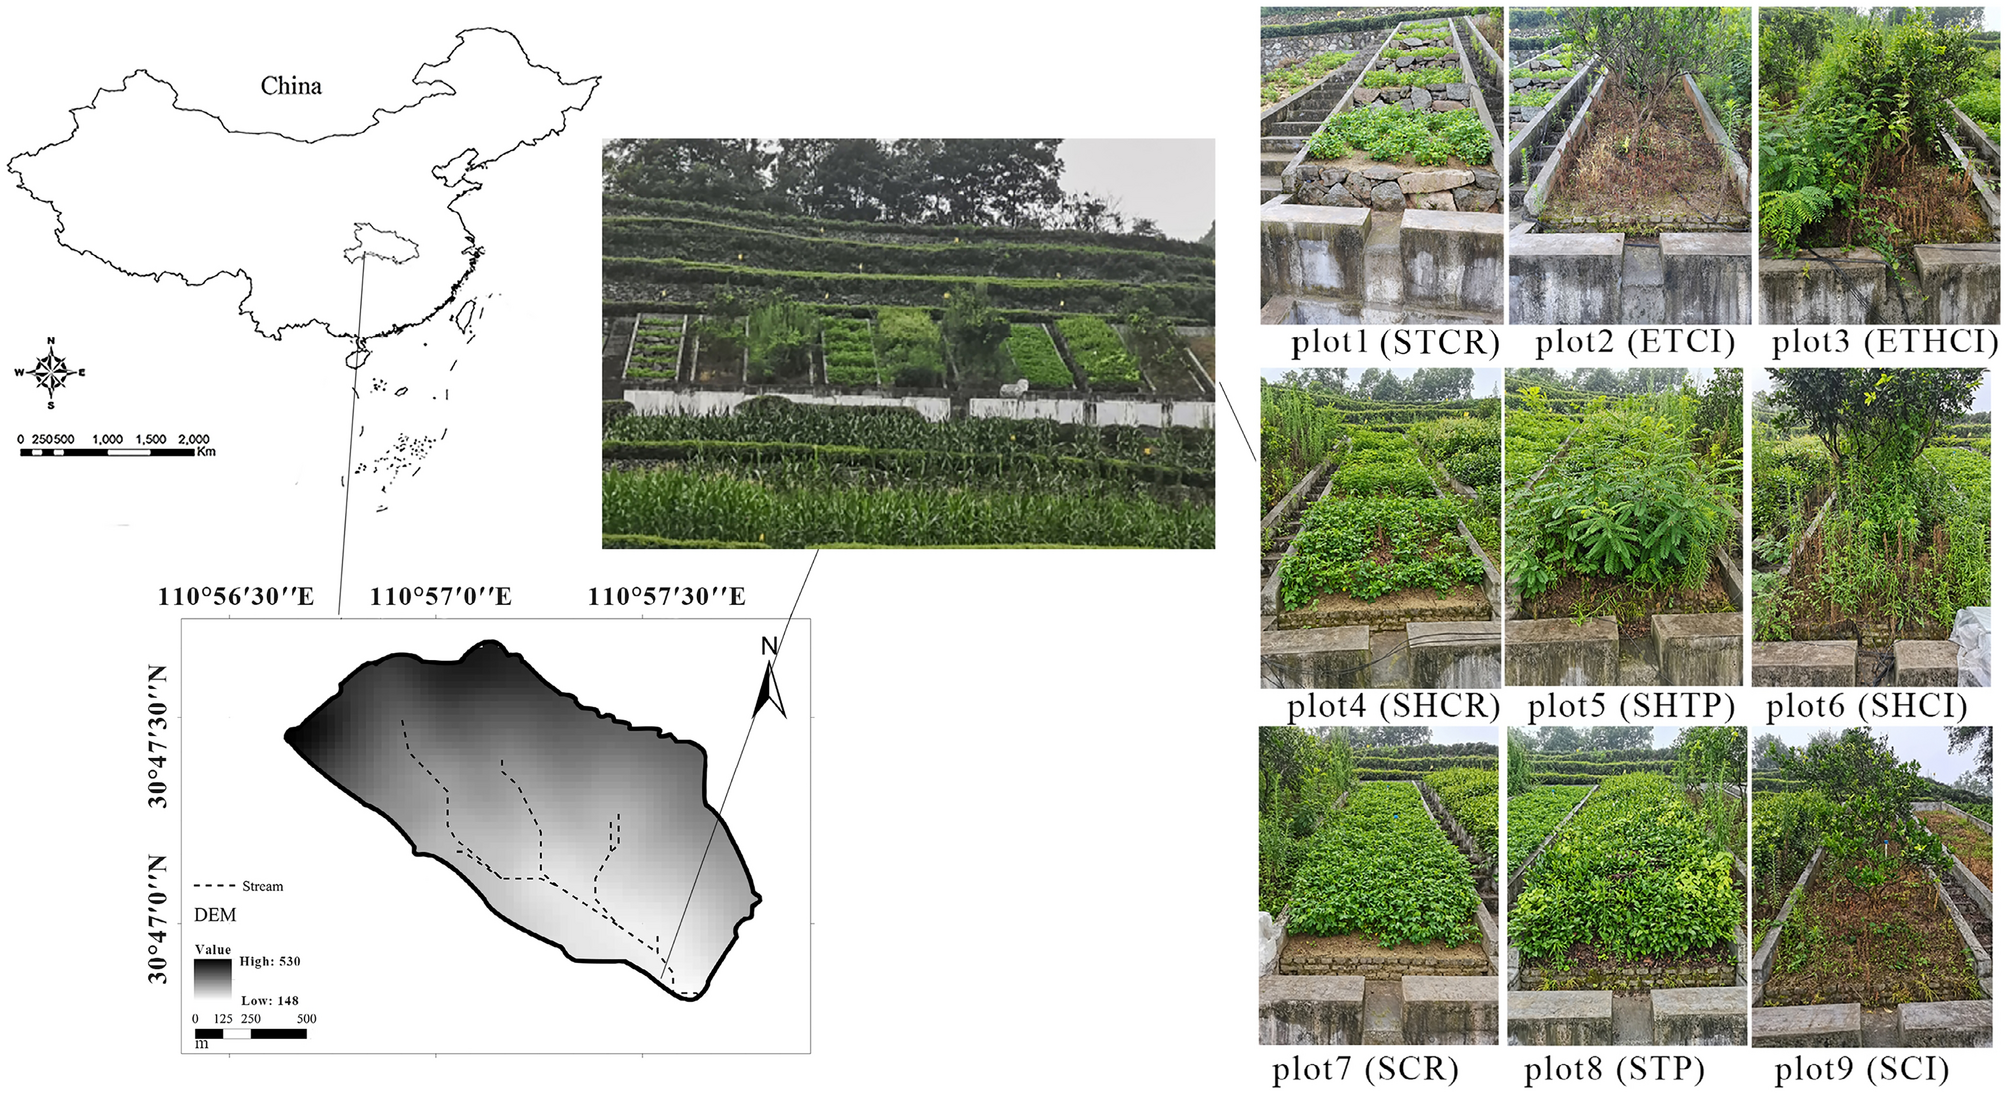 Intensified cropping reduces soil erosion and improves rainfall  partitioning and soil properties in the marginal land of the Indian  Himalayas - ScienceDirect